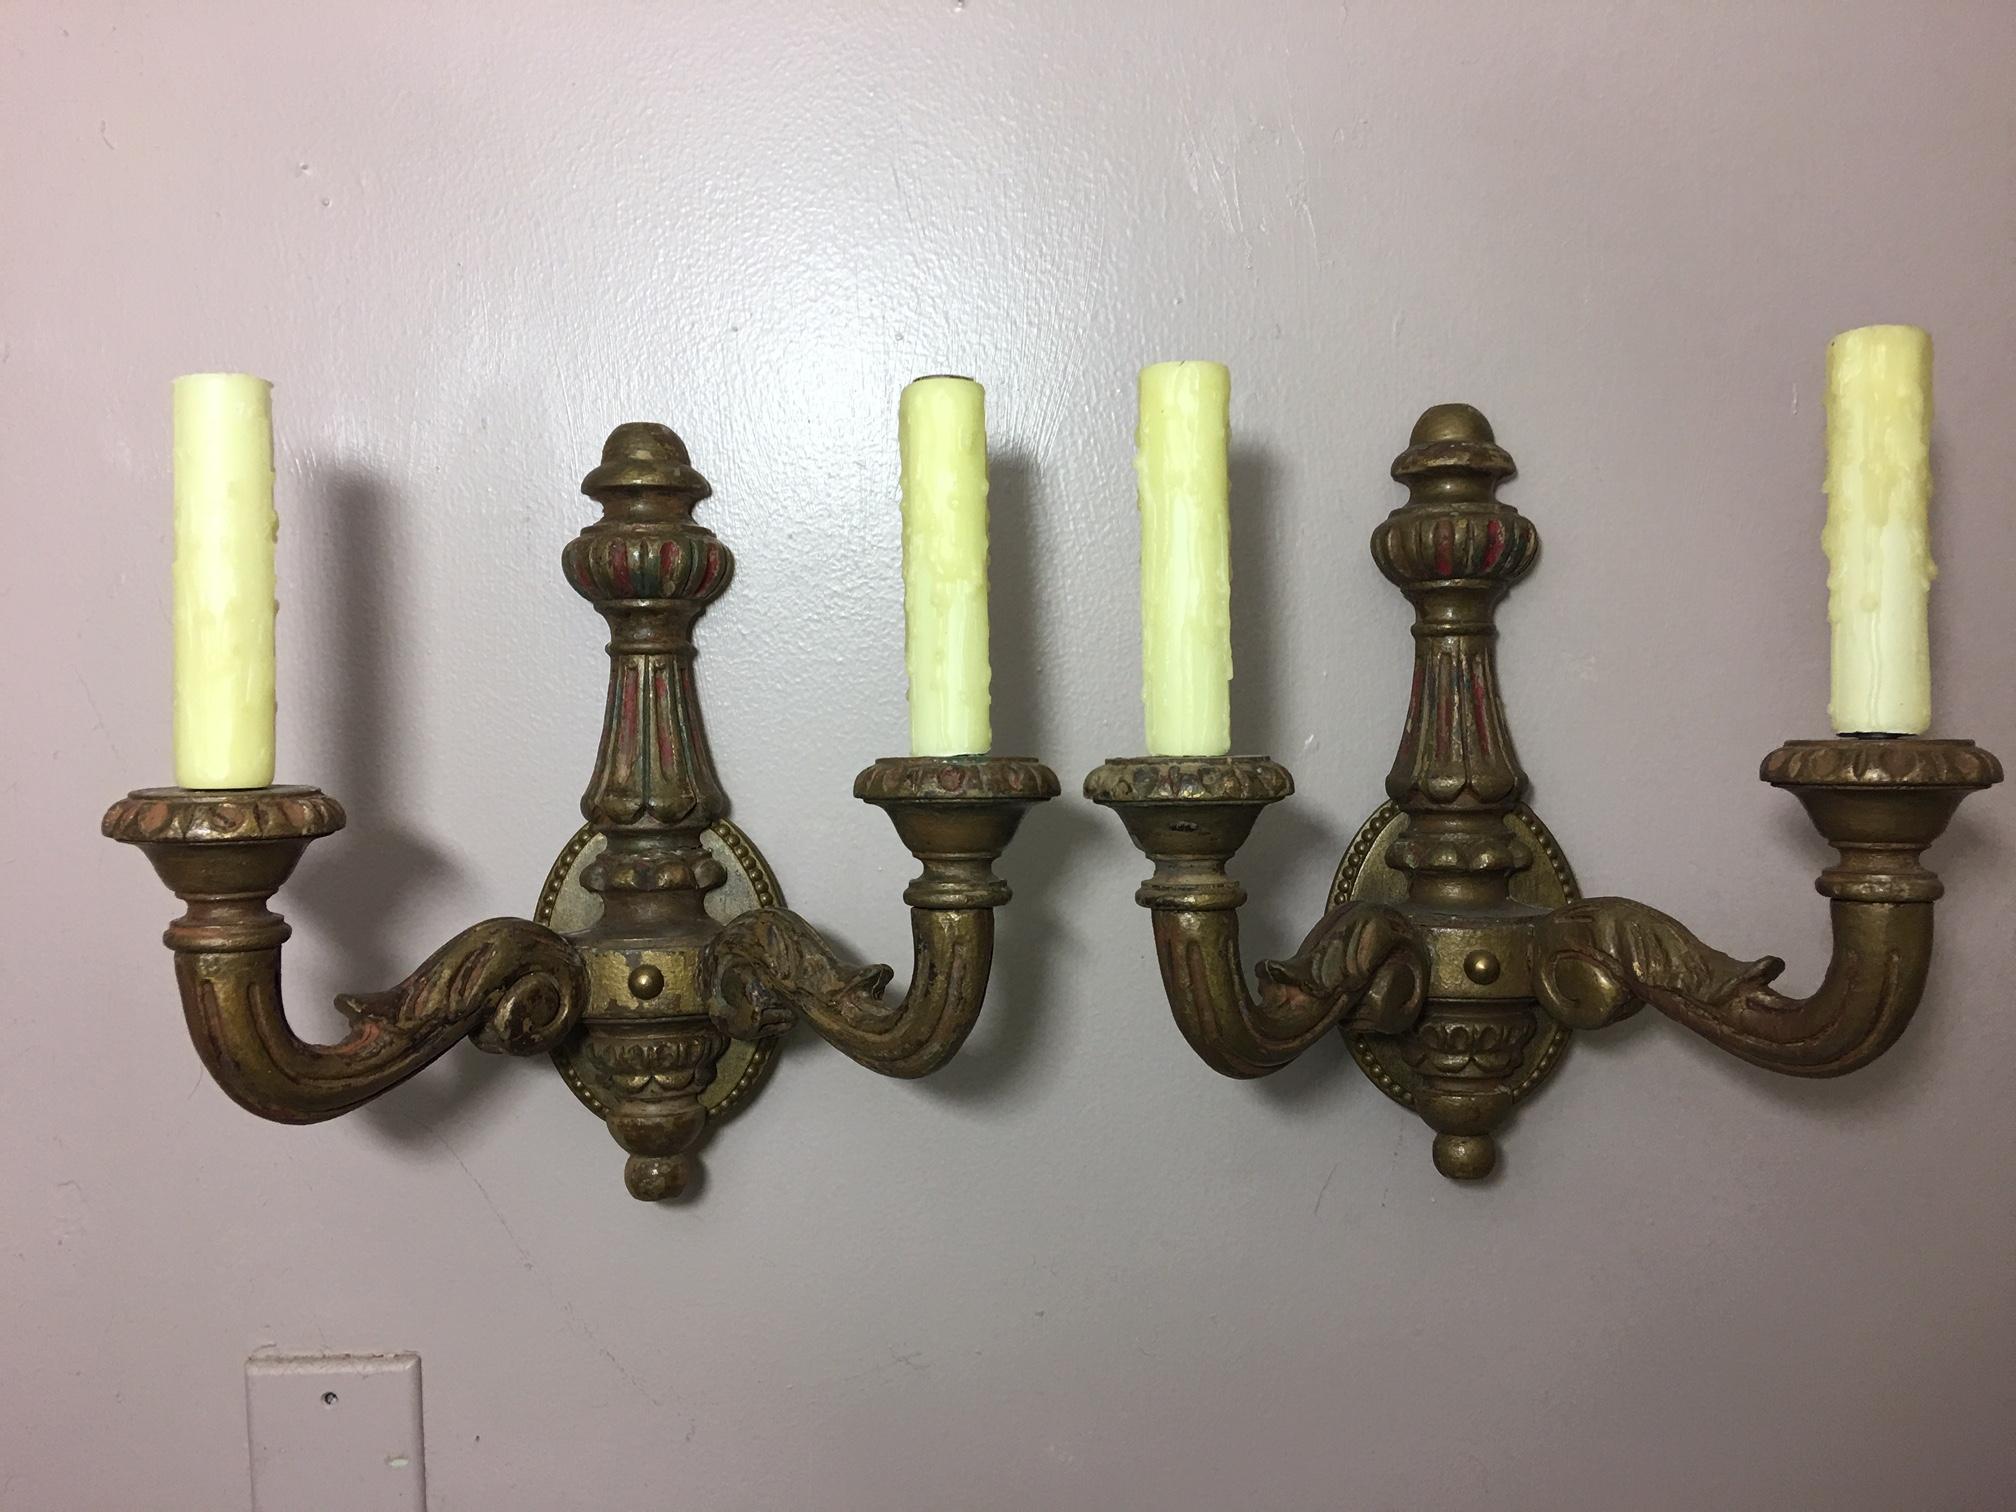 Pair of Spanish two-light carved wood sconces, early 20th century.